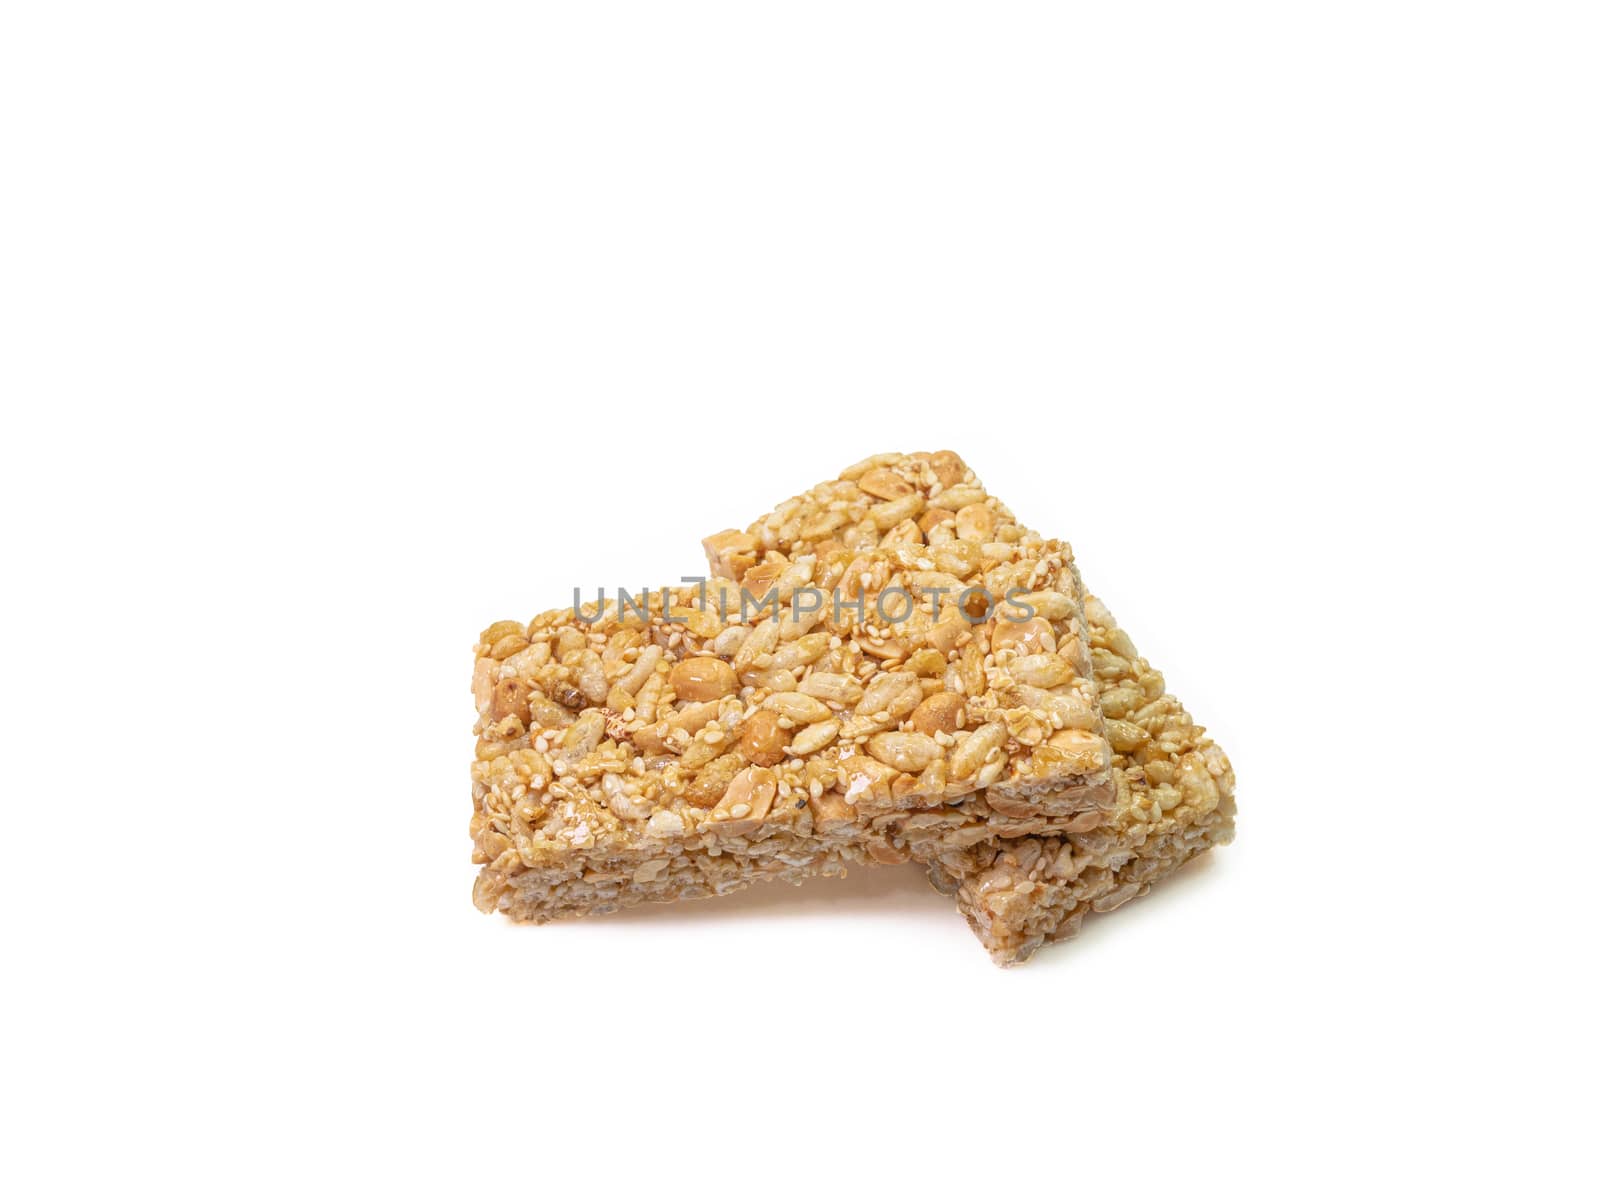 The homemade Thai sweet cereal bar candy, traditional muesli food in thailand. by phasuthorn